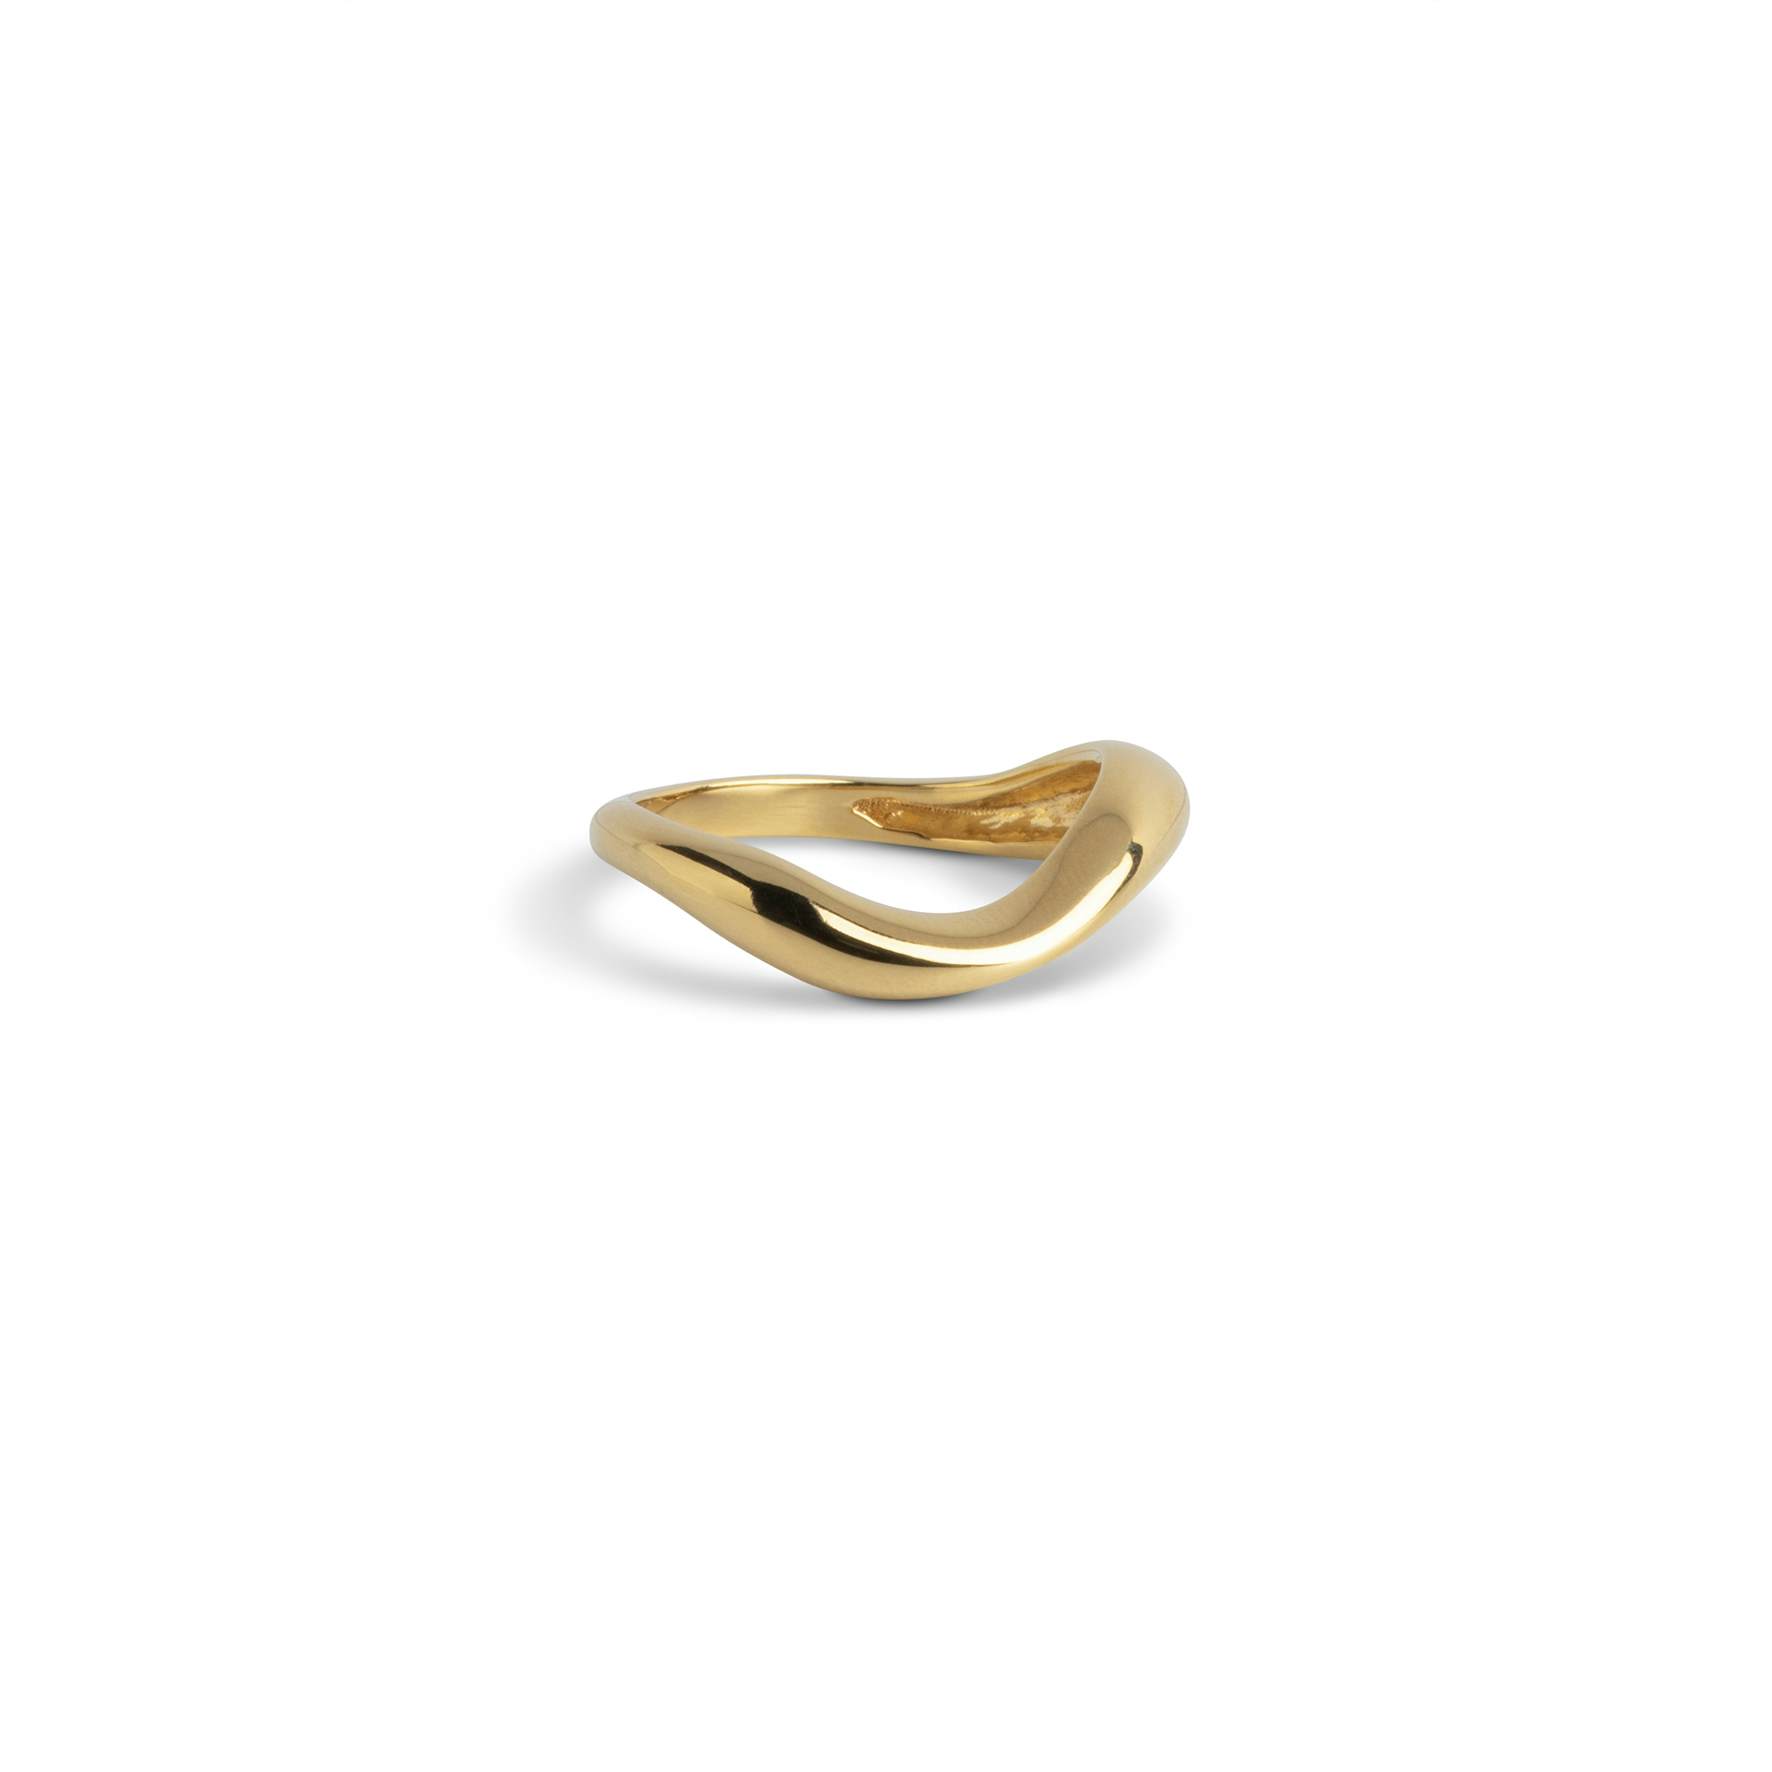 Agnete Small Ring from Enamel Copenhagen in Goldplated-Silver Sterling 925